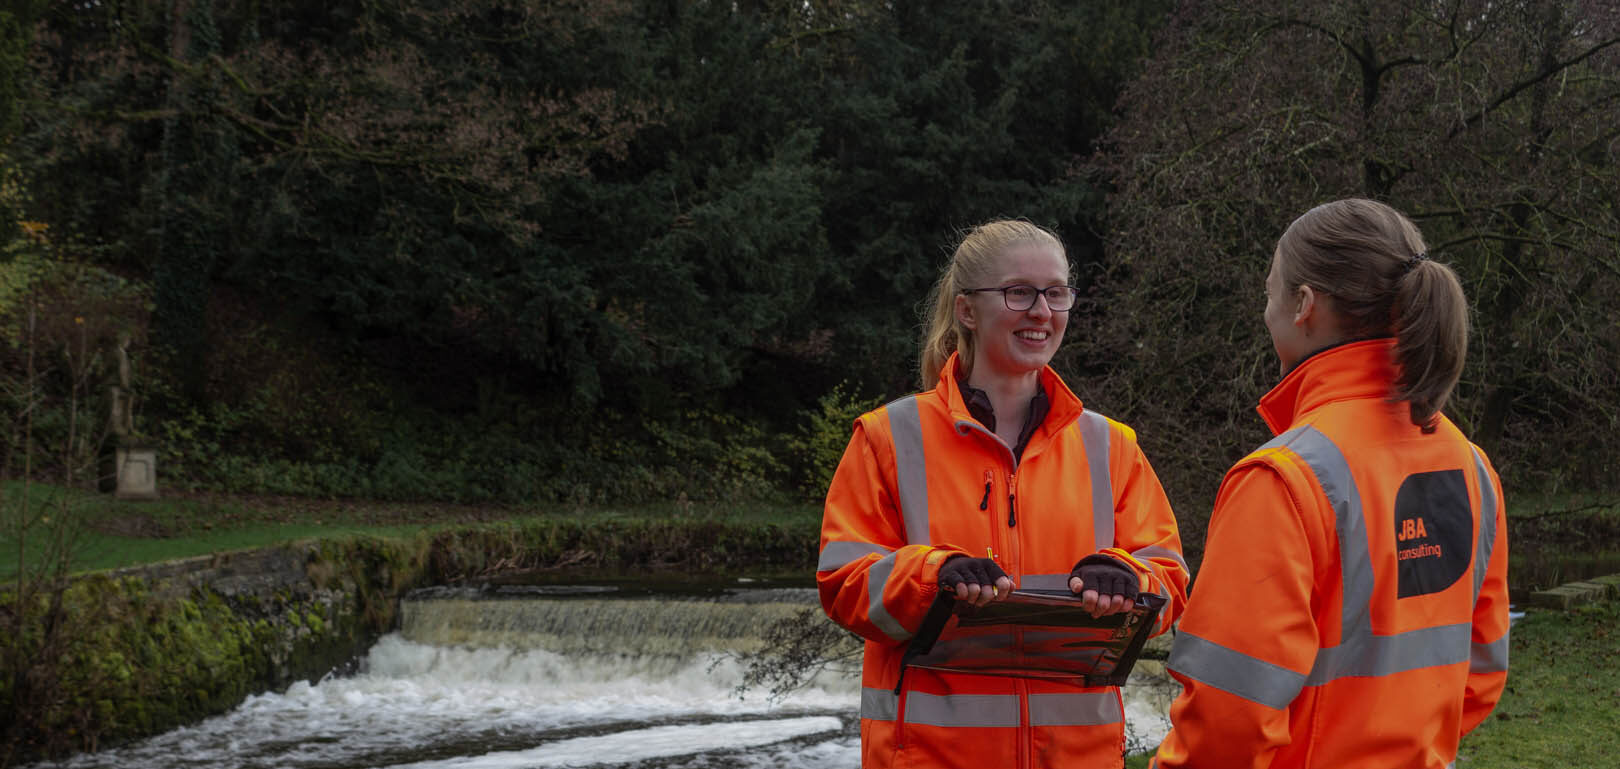 Why choose the JBA Water Management and Geoscience graduate pathway?